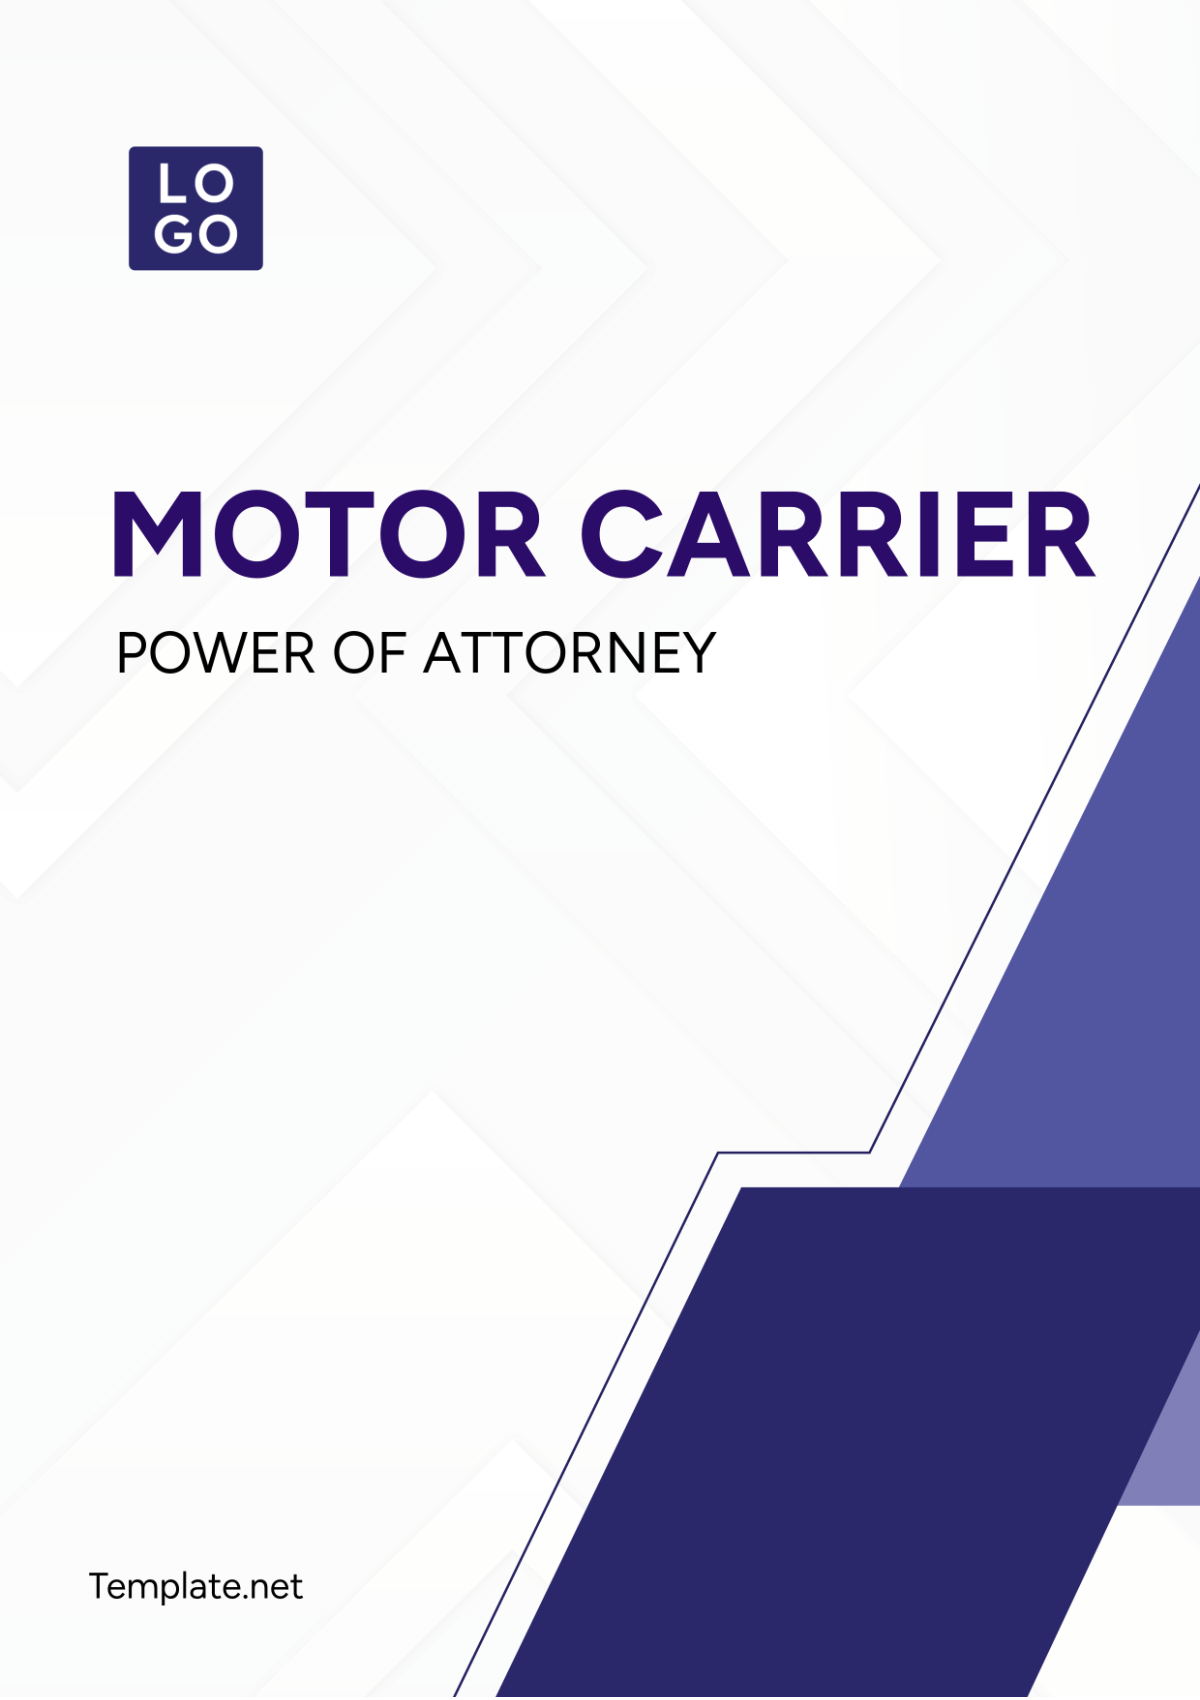 Motor Carrier Power of Attorney Template